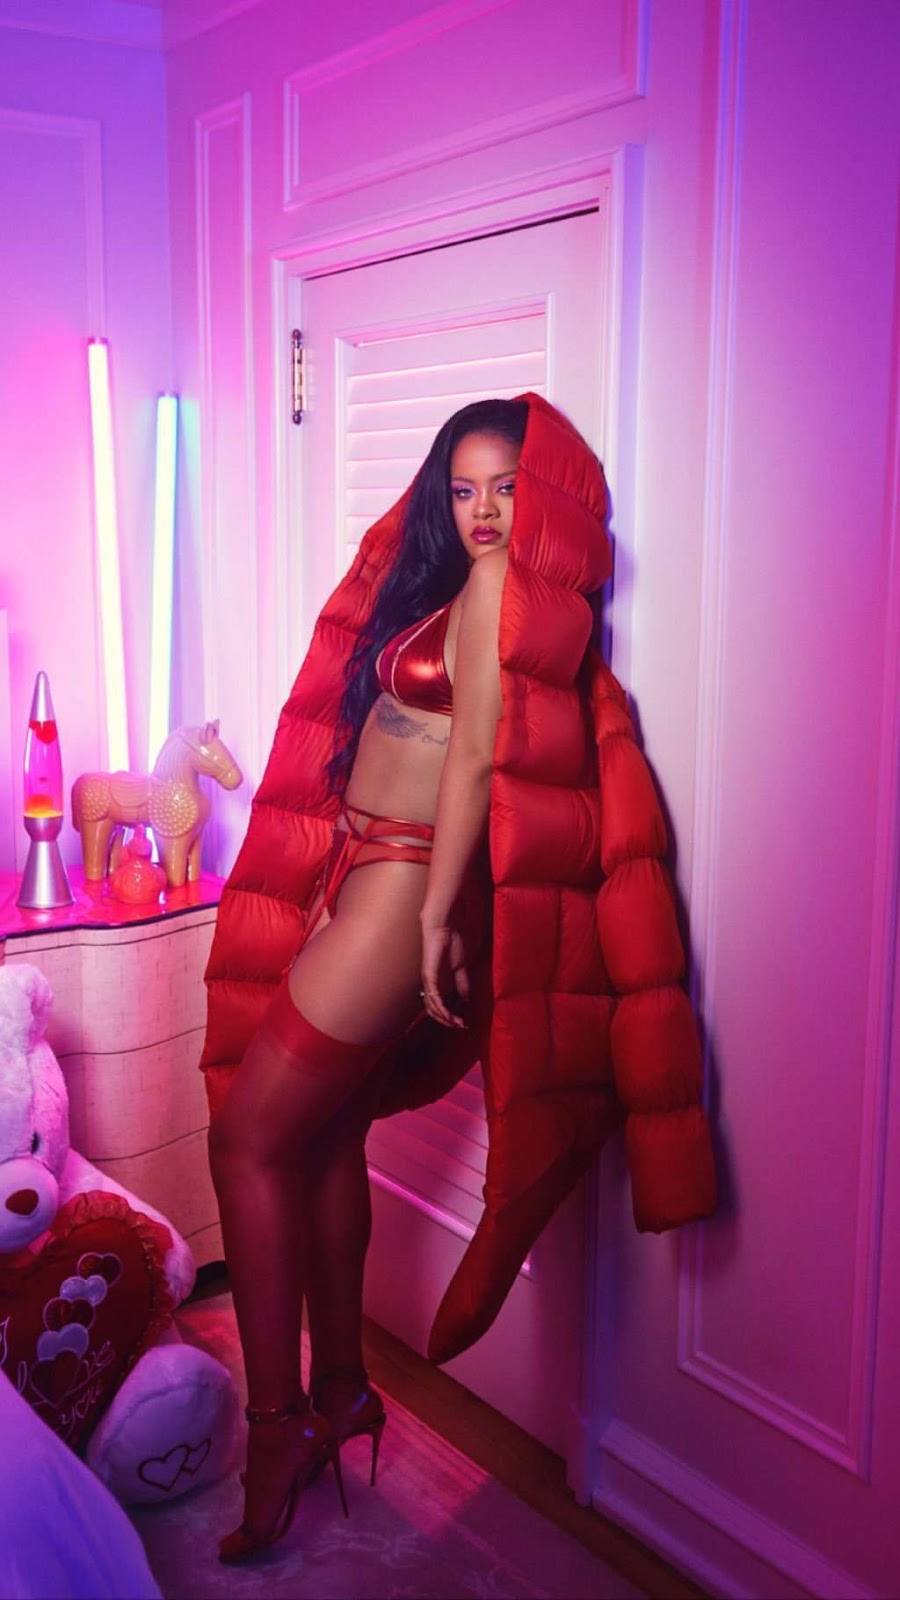 Rihanna show off big breast in sexy lingerie model photoshoot